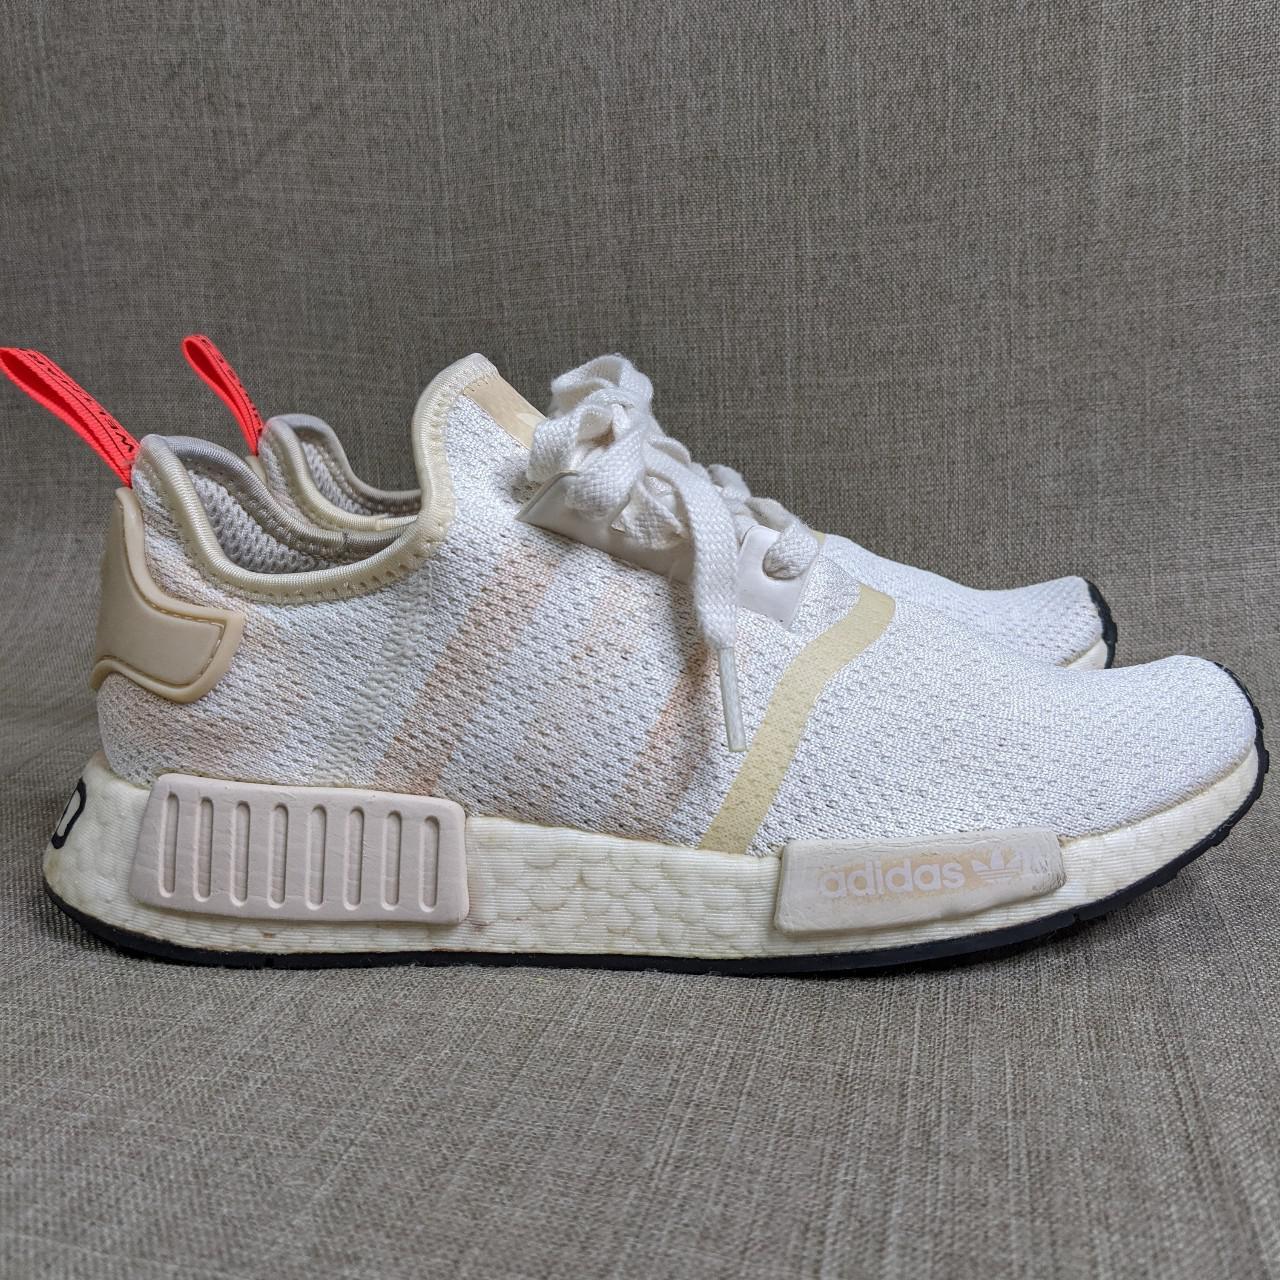 Product Image 3 - Adidas NMD R1 sneakers.

Women's size